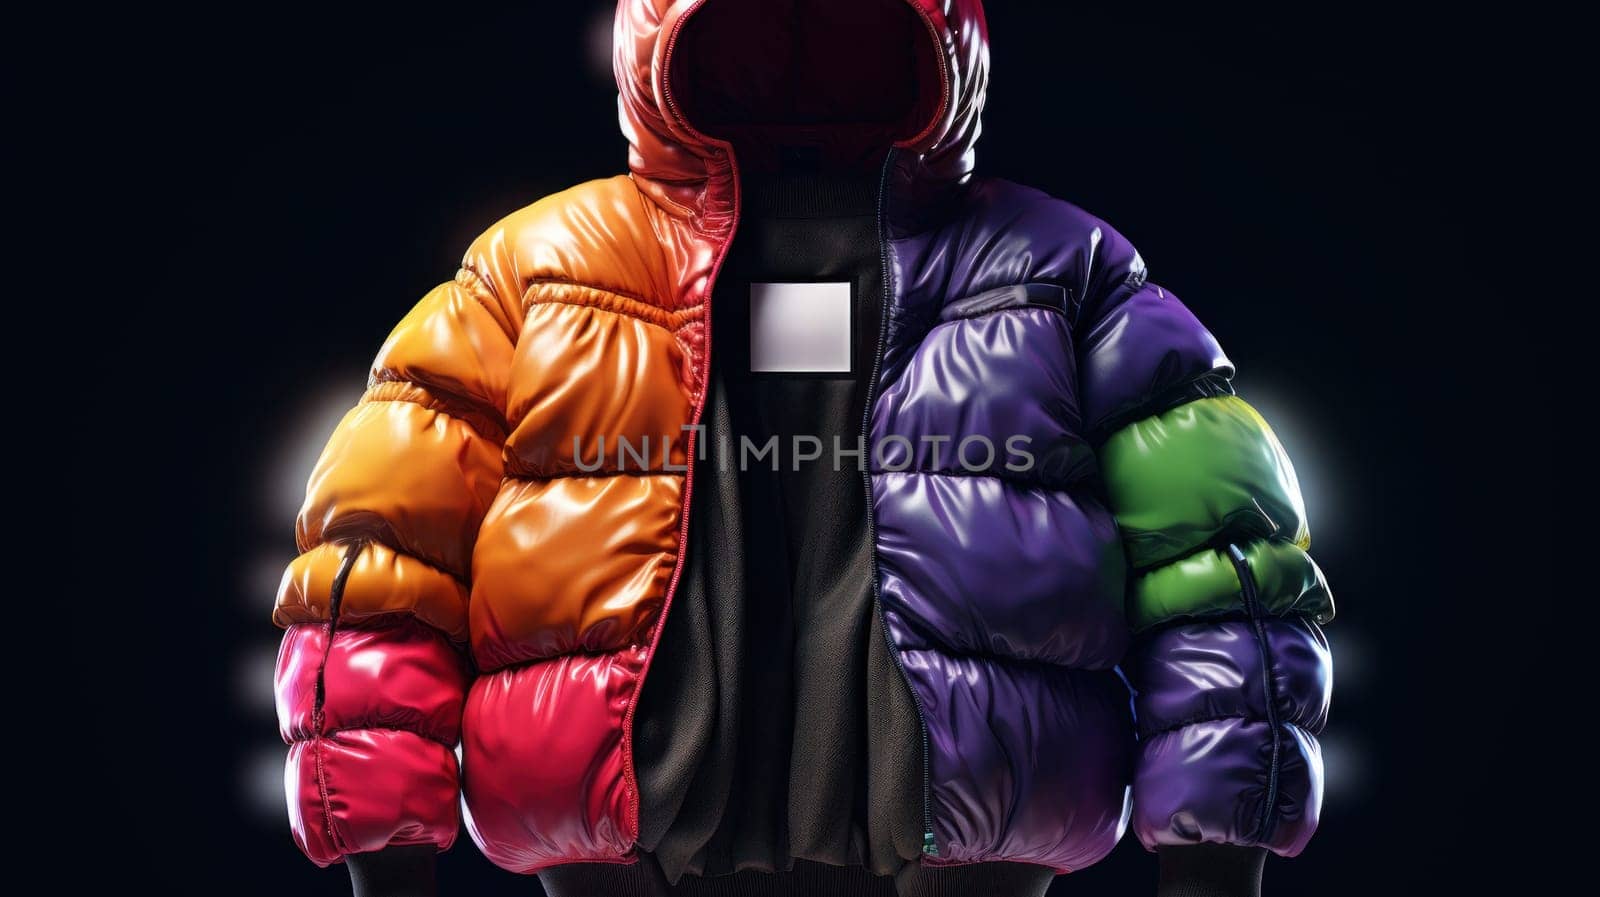 A colorful puffy jacket with hood and zipper on the back